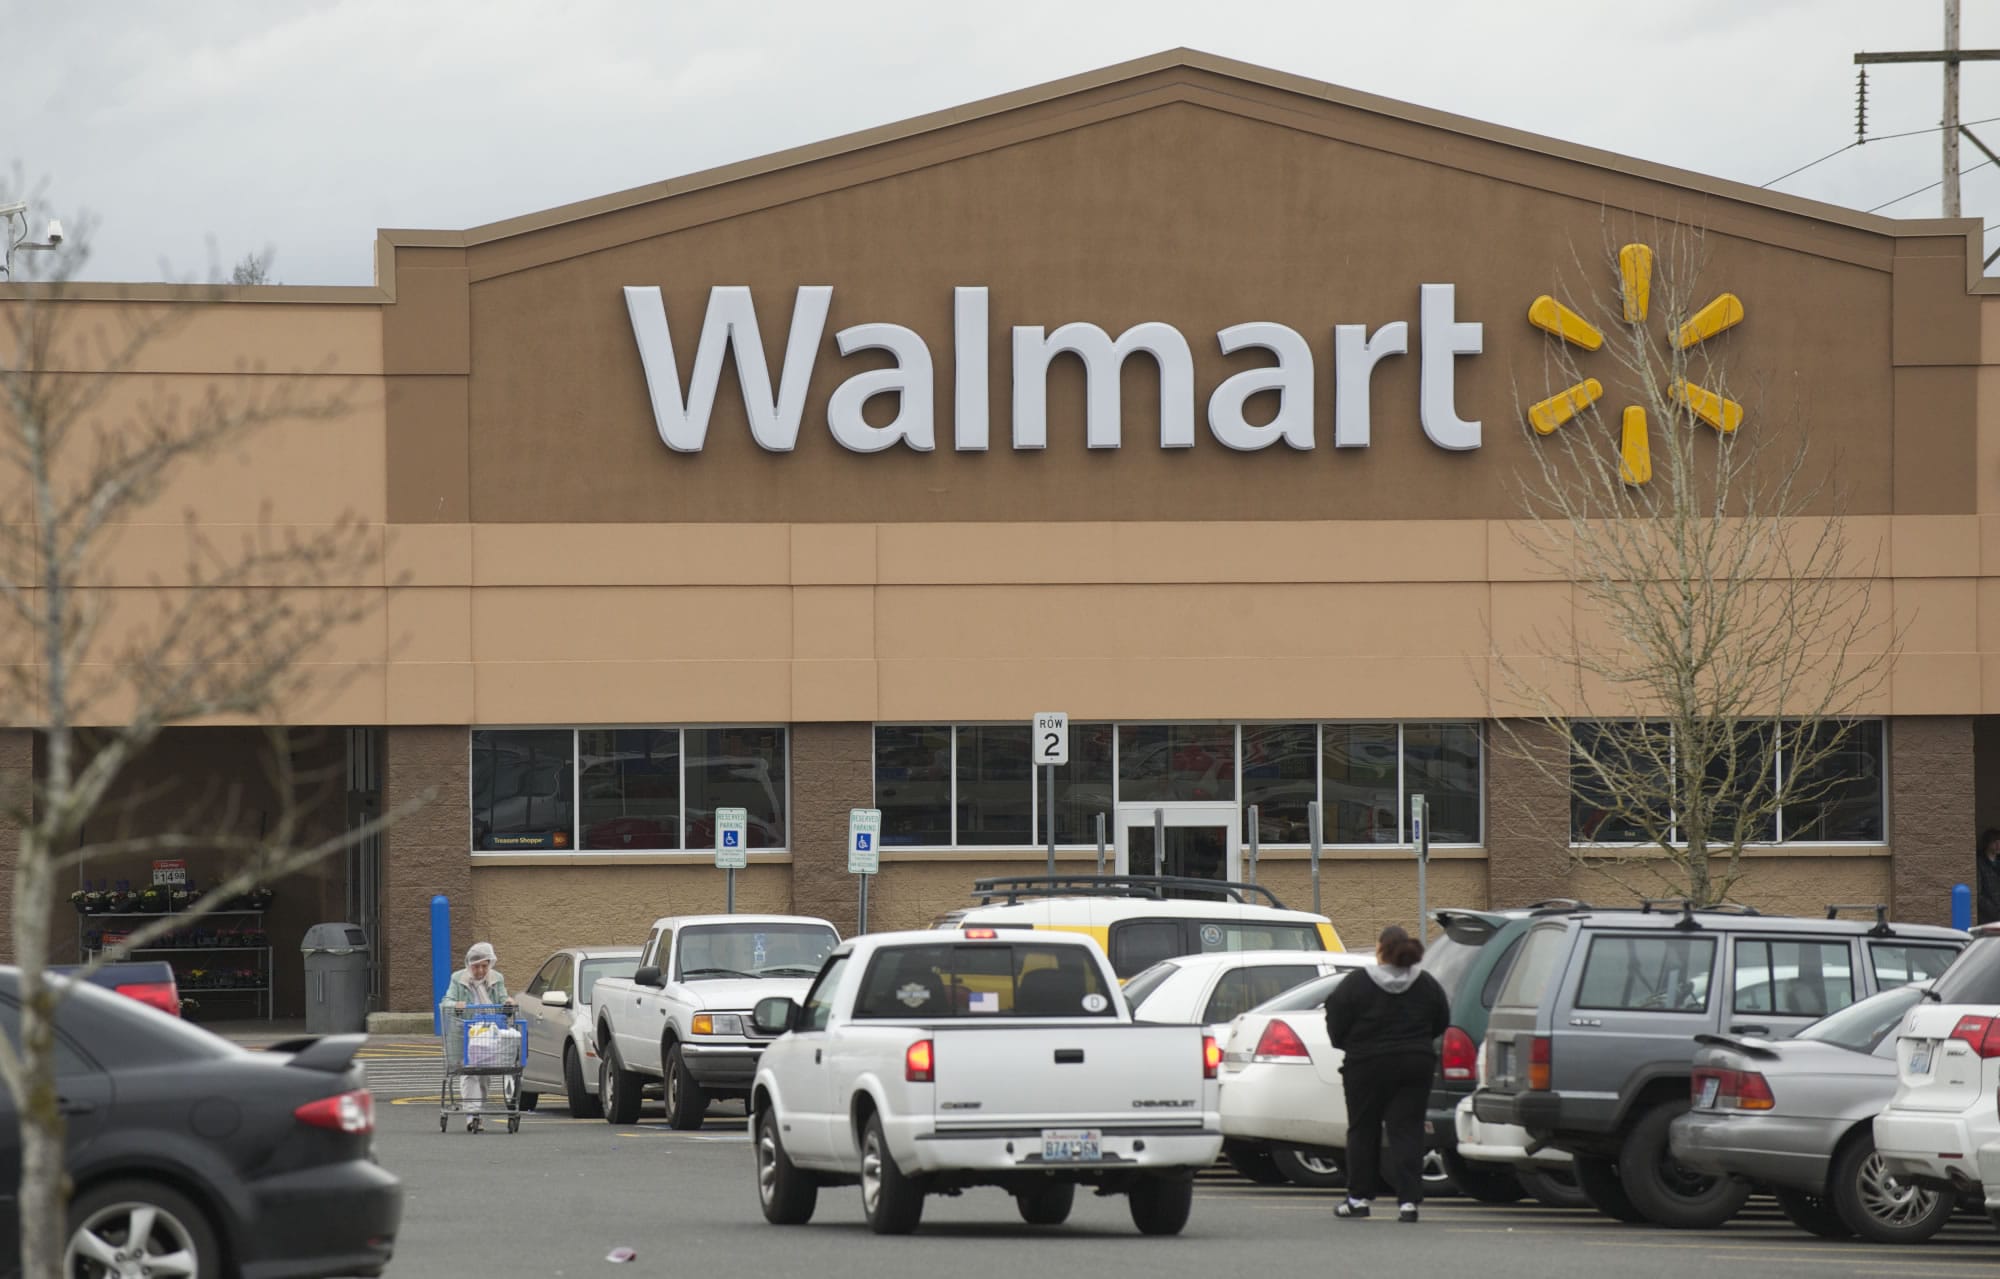 A Walmart development boom appears to be brewing throughout Clark County, where the company plans to build at least one new &quot;Neighborhood Market&quot; grocery store and three more Supercenters to join its two stores in Vancouver and this Hazel Dell store.